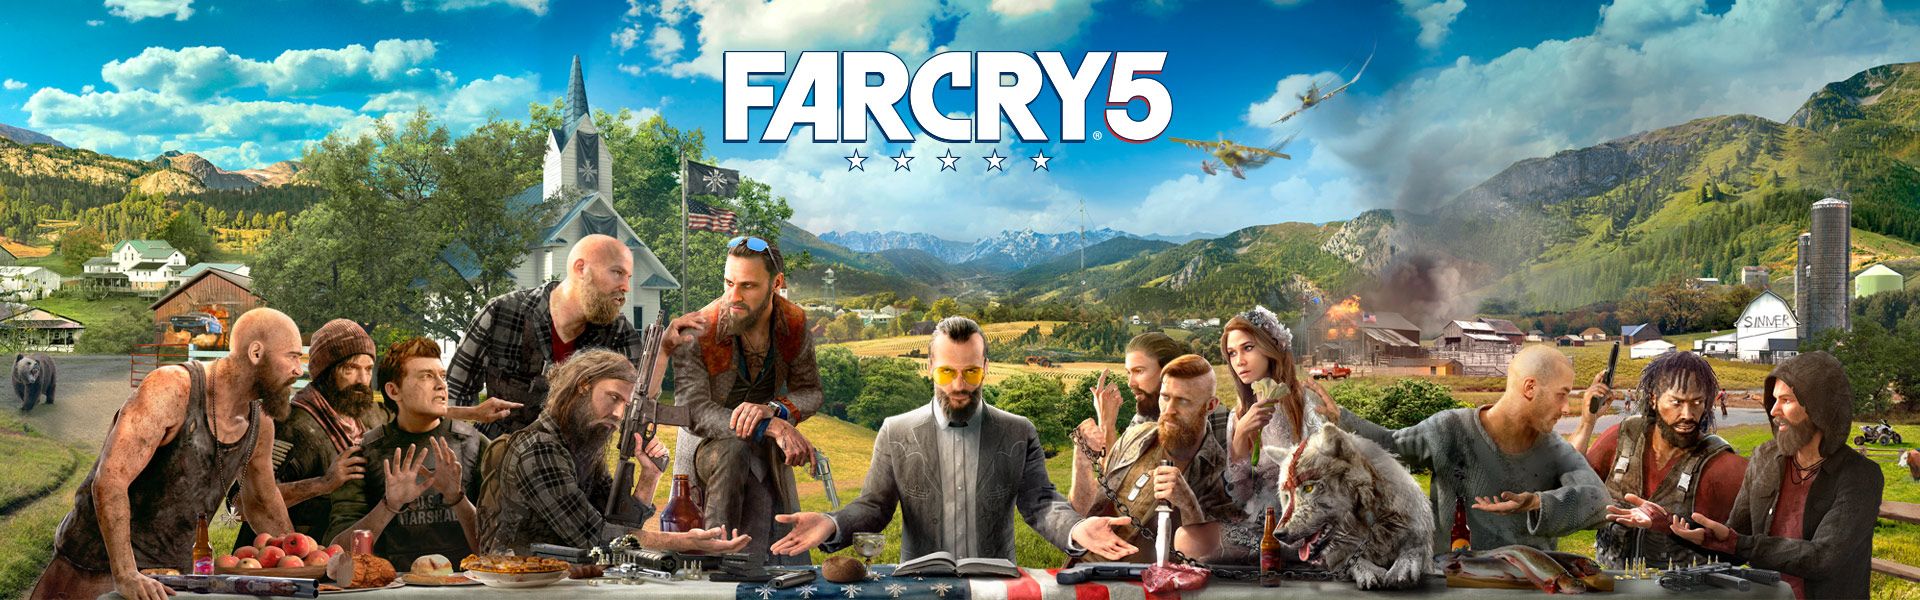 Far Cry 5 has been Cracked